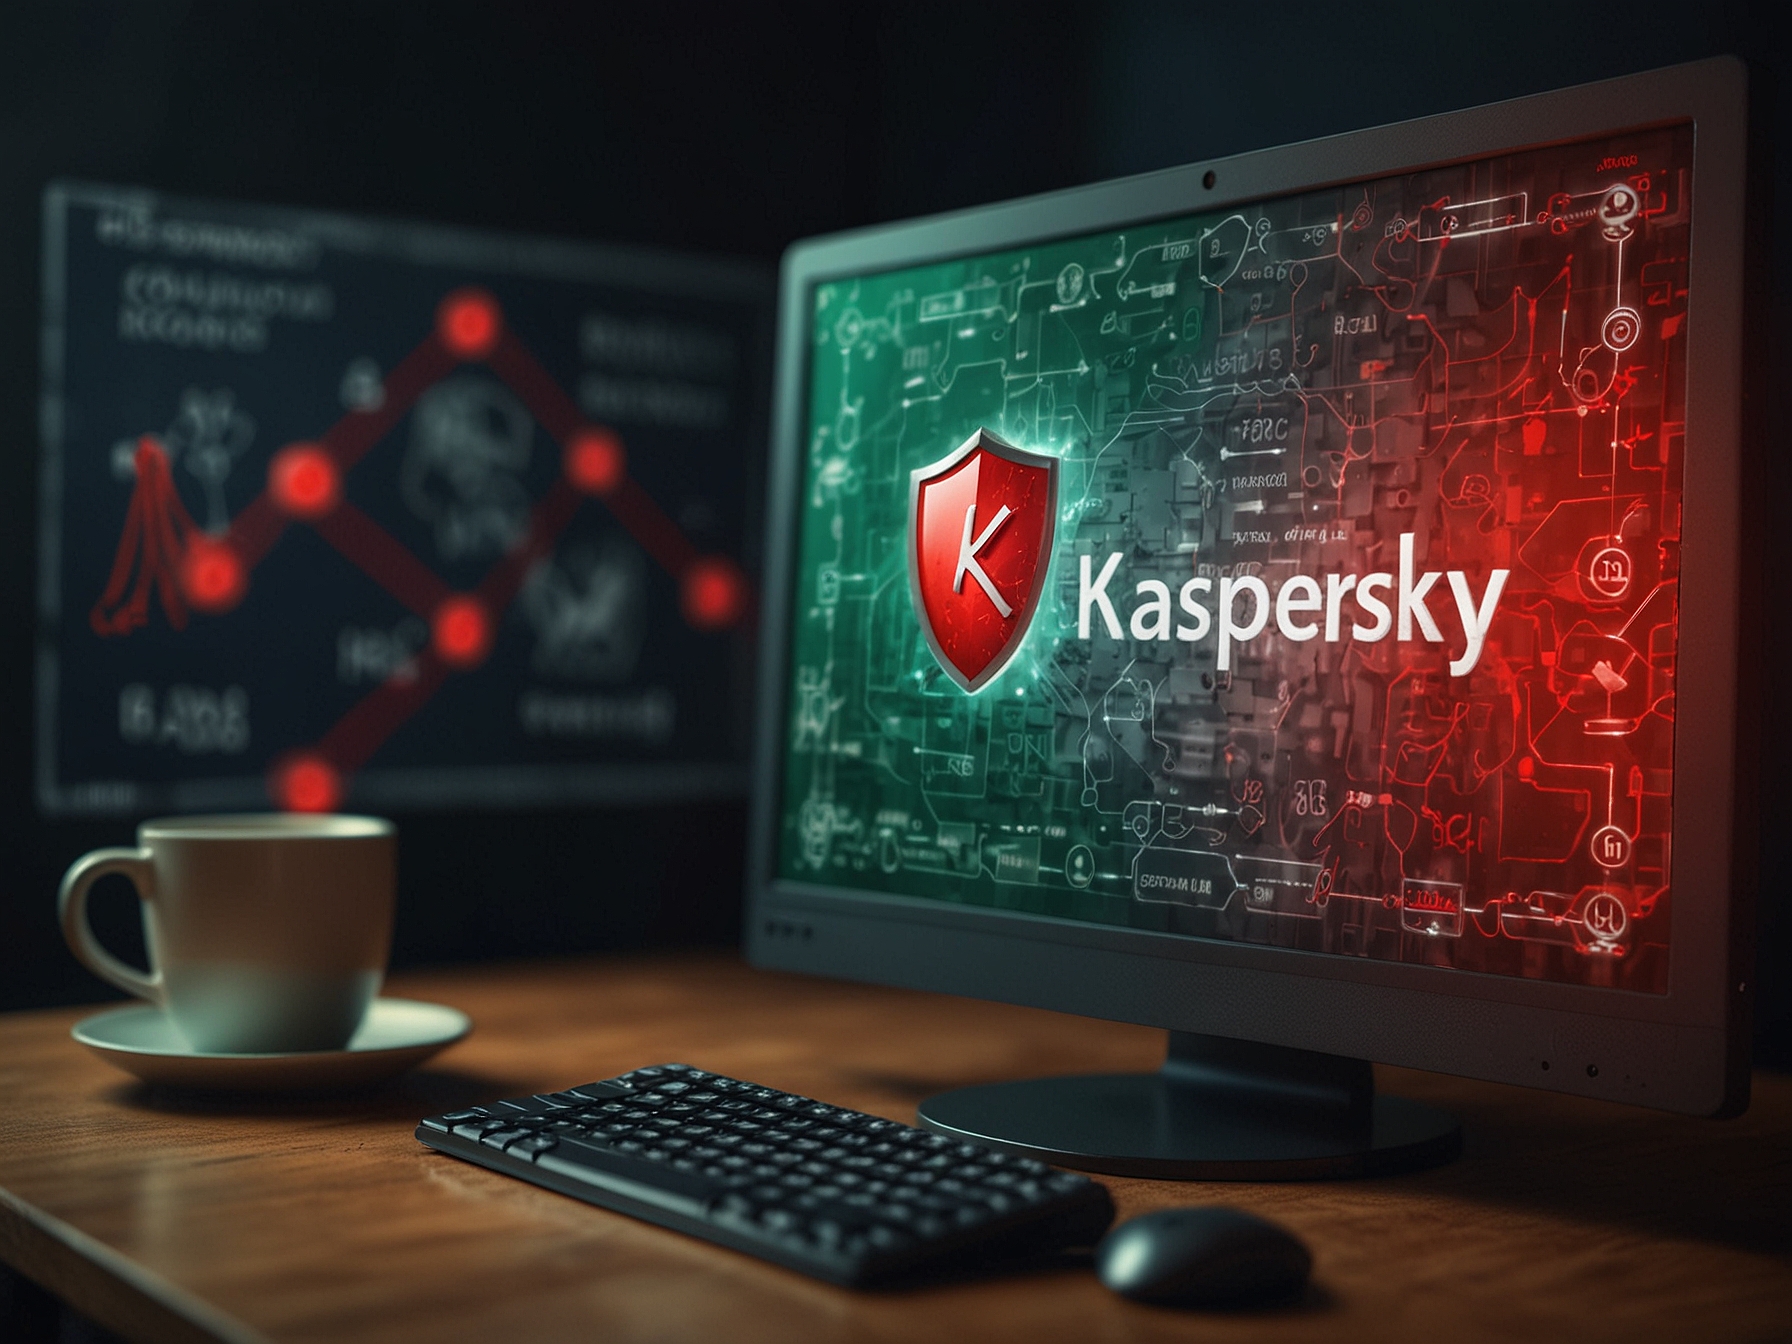 A computer screen displaying the Kaspersky antivirus software interface, with a red alert icon symbolizing the security risks and the recent ban imposed by the Biden administration.